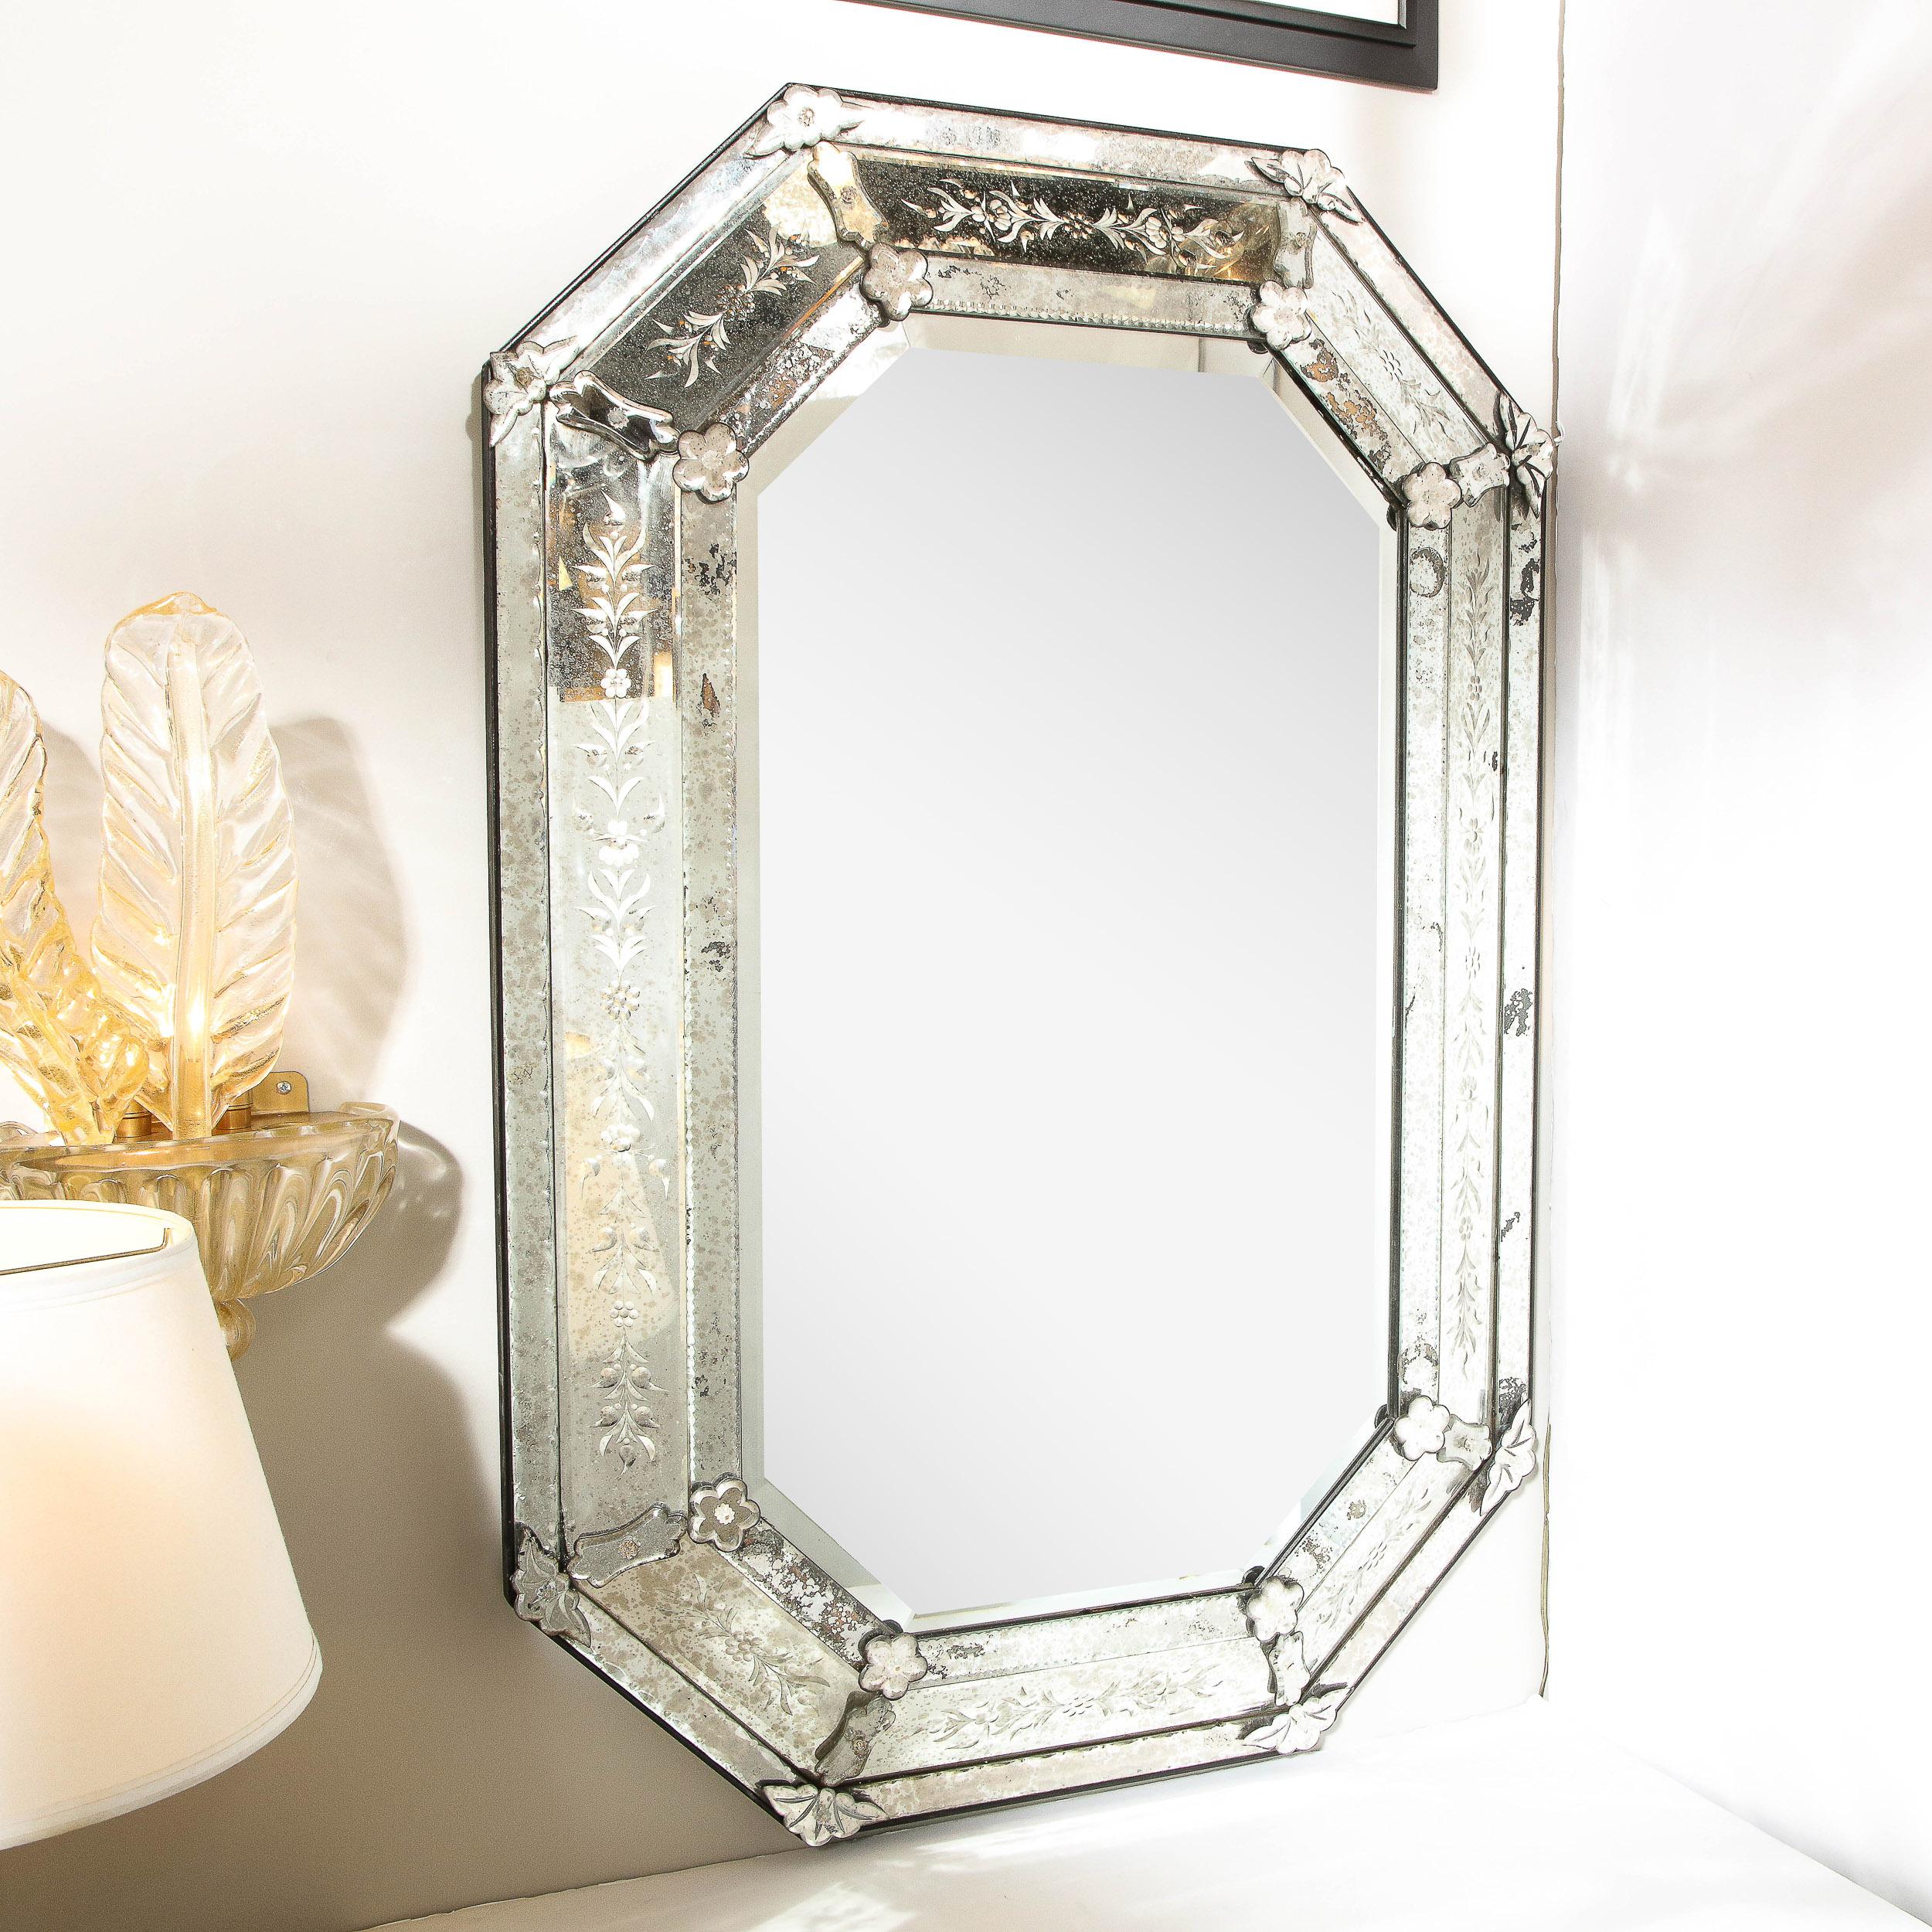 This stunning Art Deco octagonal Venetian mirror was realized in France circa 1935. The piece is composed of eight straight sides that intersect at angles forming the perimeter in raised smoked and antiqued mirror. The frame is composed of three